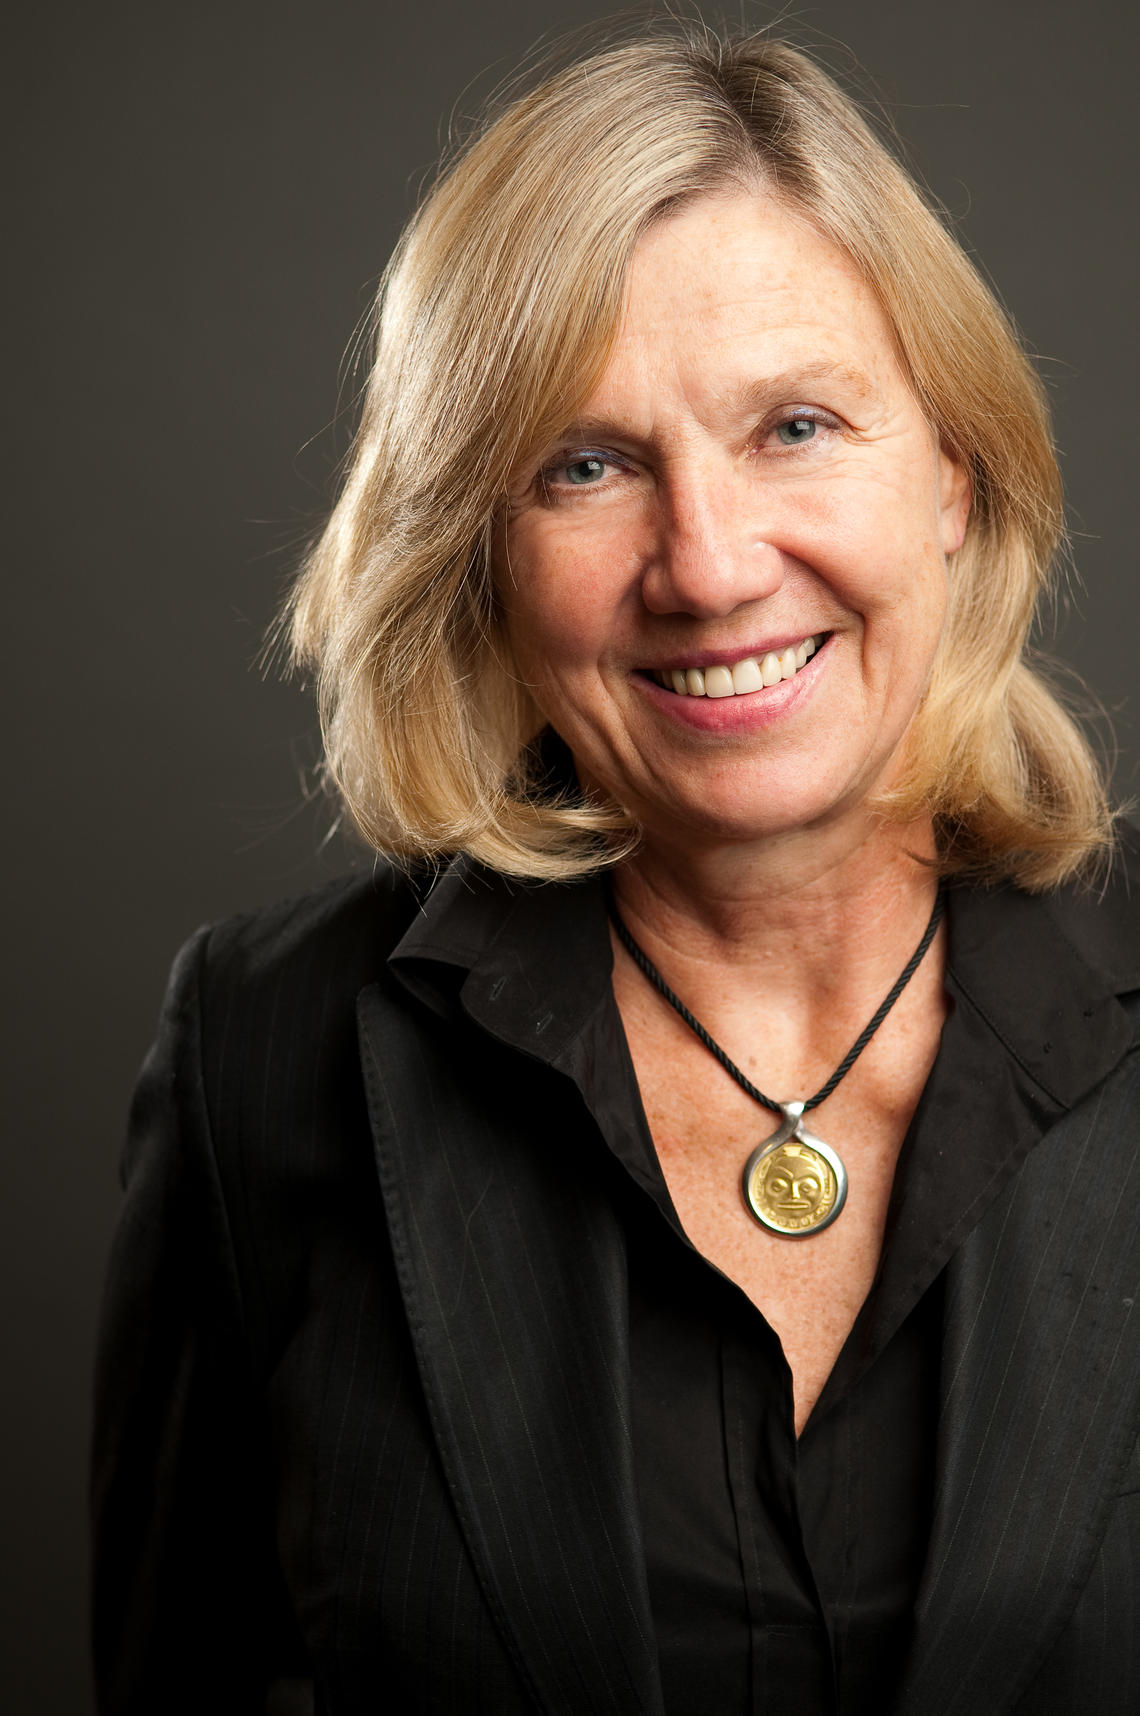 Professor Kathleen Mahoney is teaching a new course at the law school, Indigenous Legal Traditions. She was the chief negotiator for the Assembly of First Nations and primary architect of the Truth and Reconciliation Commission in the historic Indian Residential School Settlement Agreement.